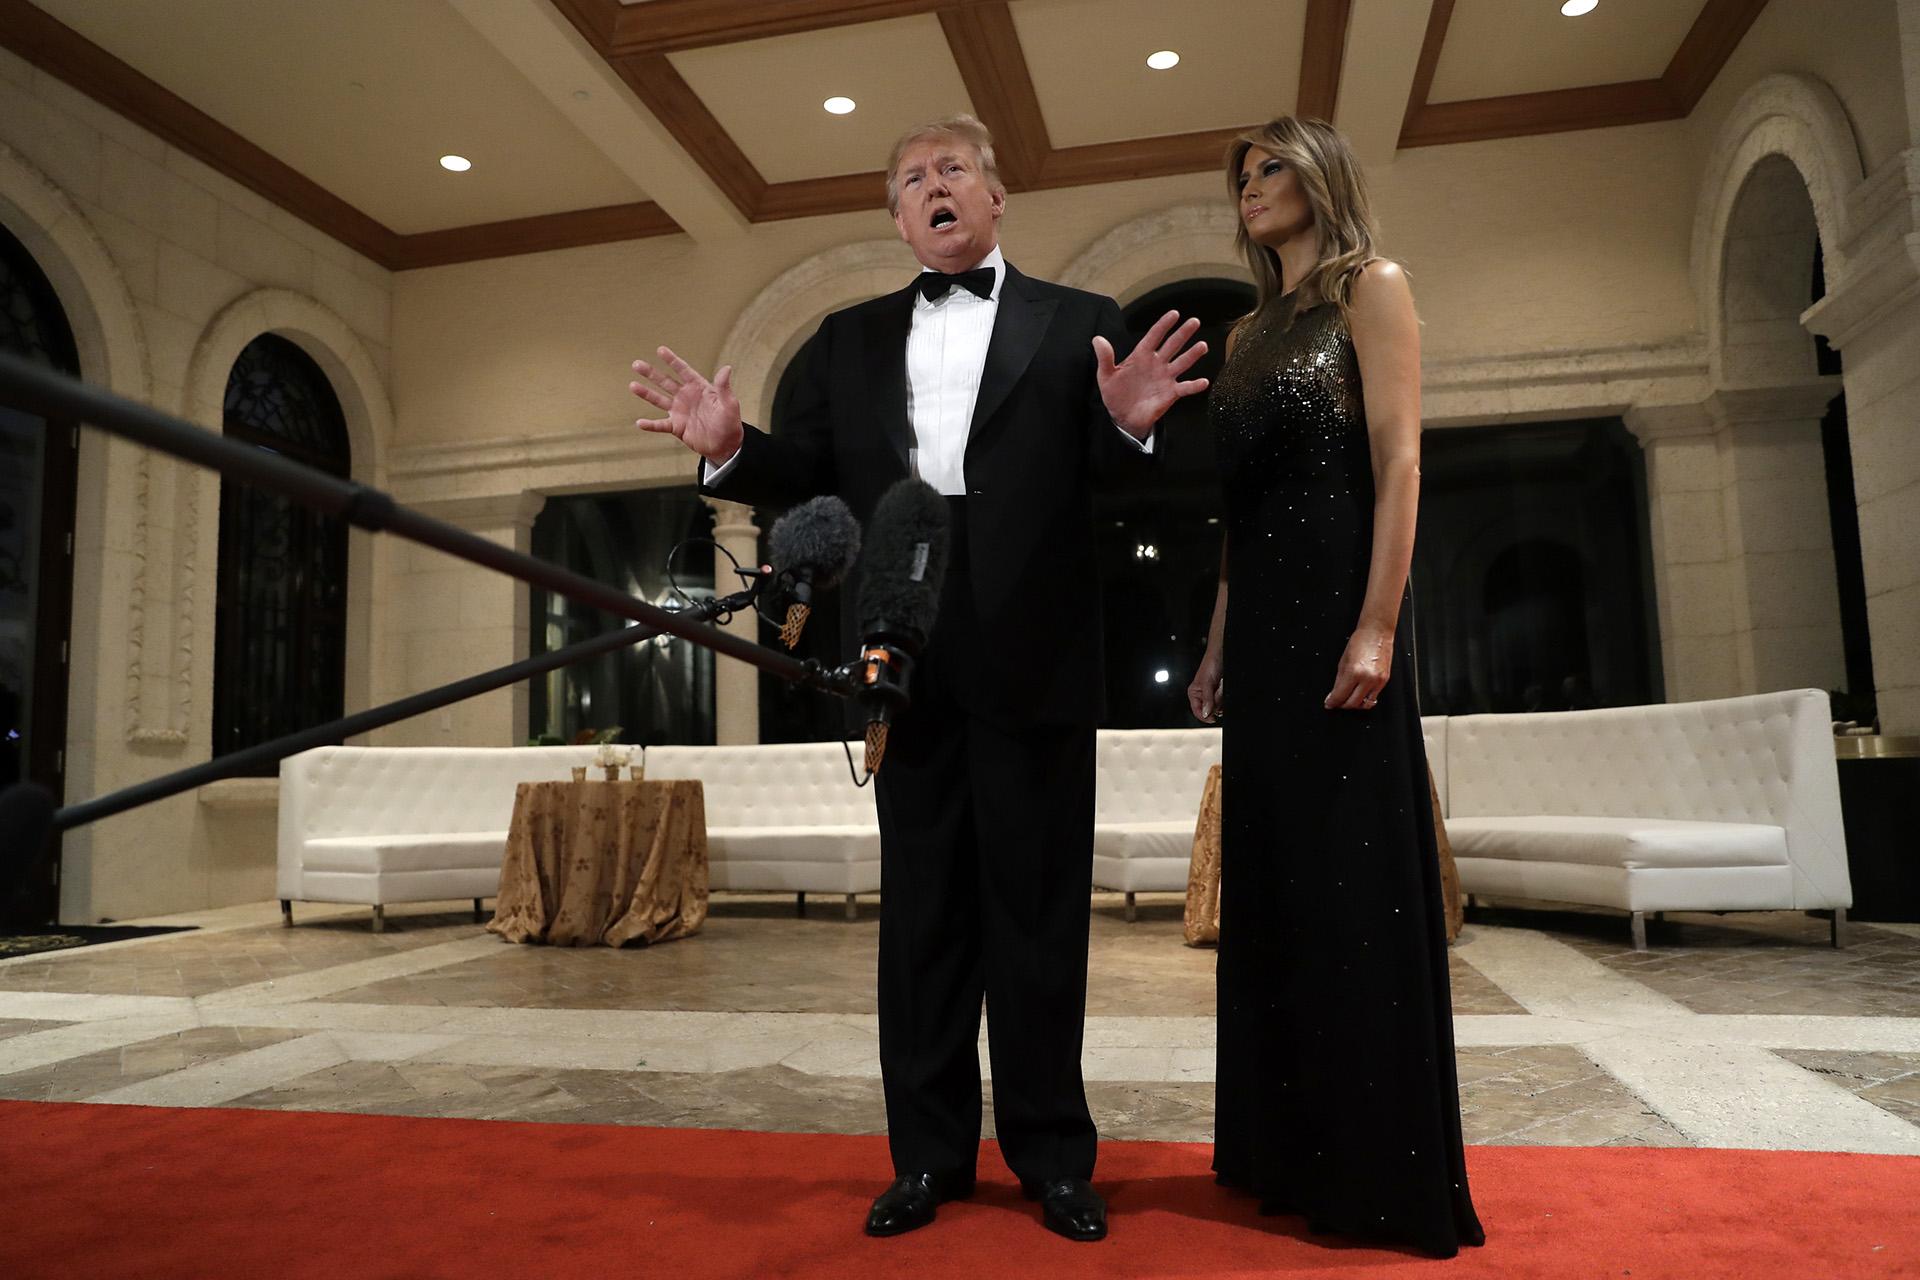 President Donald Trump speaks to the media about the situation at the U.S. embassy in Baghdad, from his Mar-a-Lago property, Tuesday, Dec. 31, 2019, in Palm Beach, Florida, as Melania Trump stands next to him. (AP Photo / Evan Vucci)